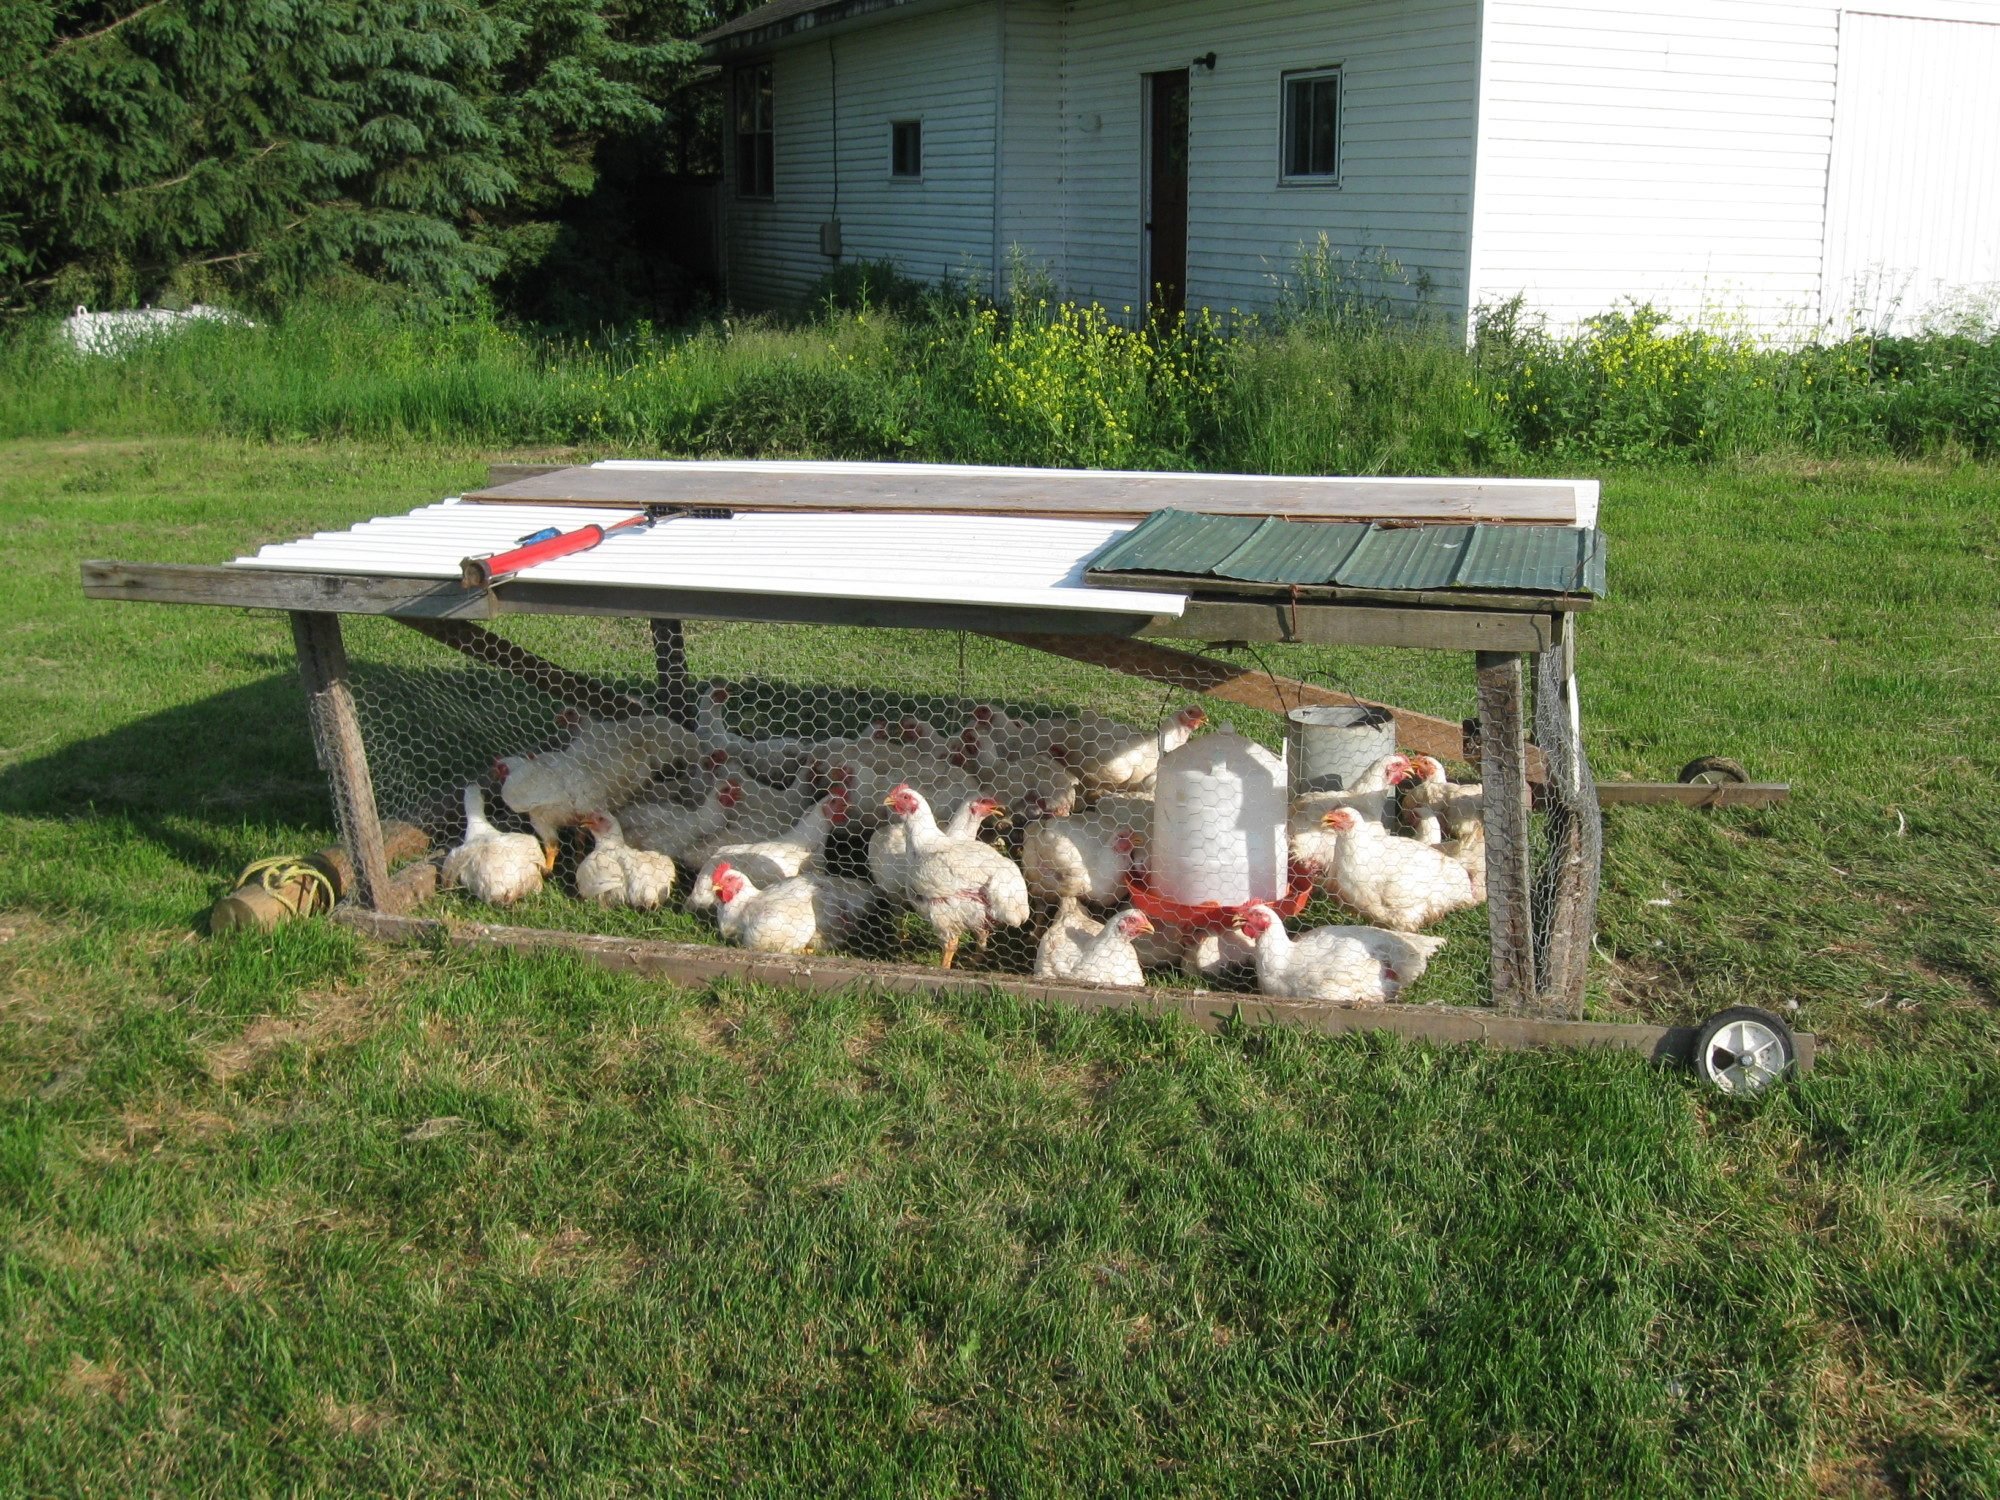 ... chicken coop for my meat birds and it was pretty cheap to build